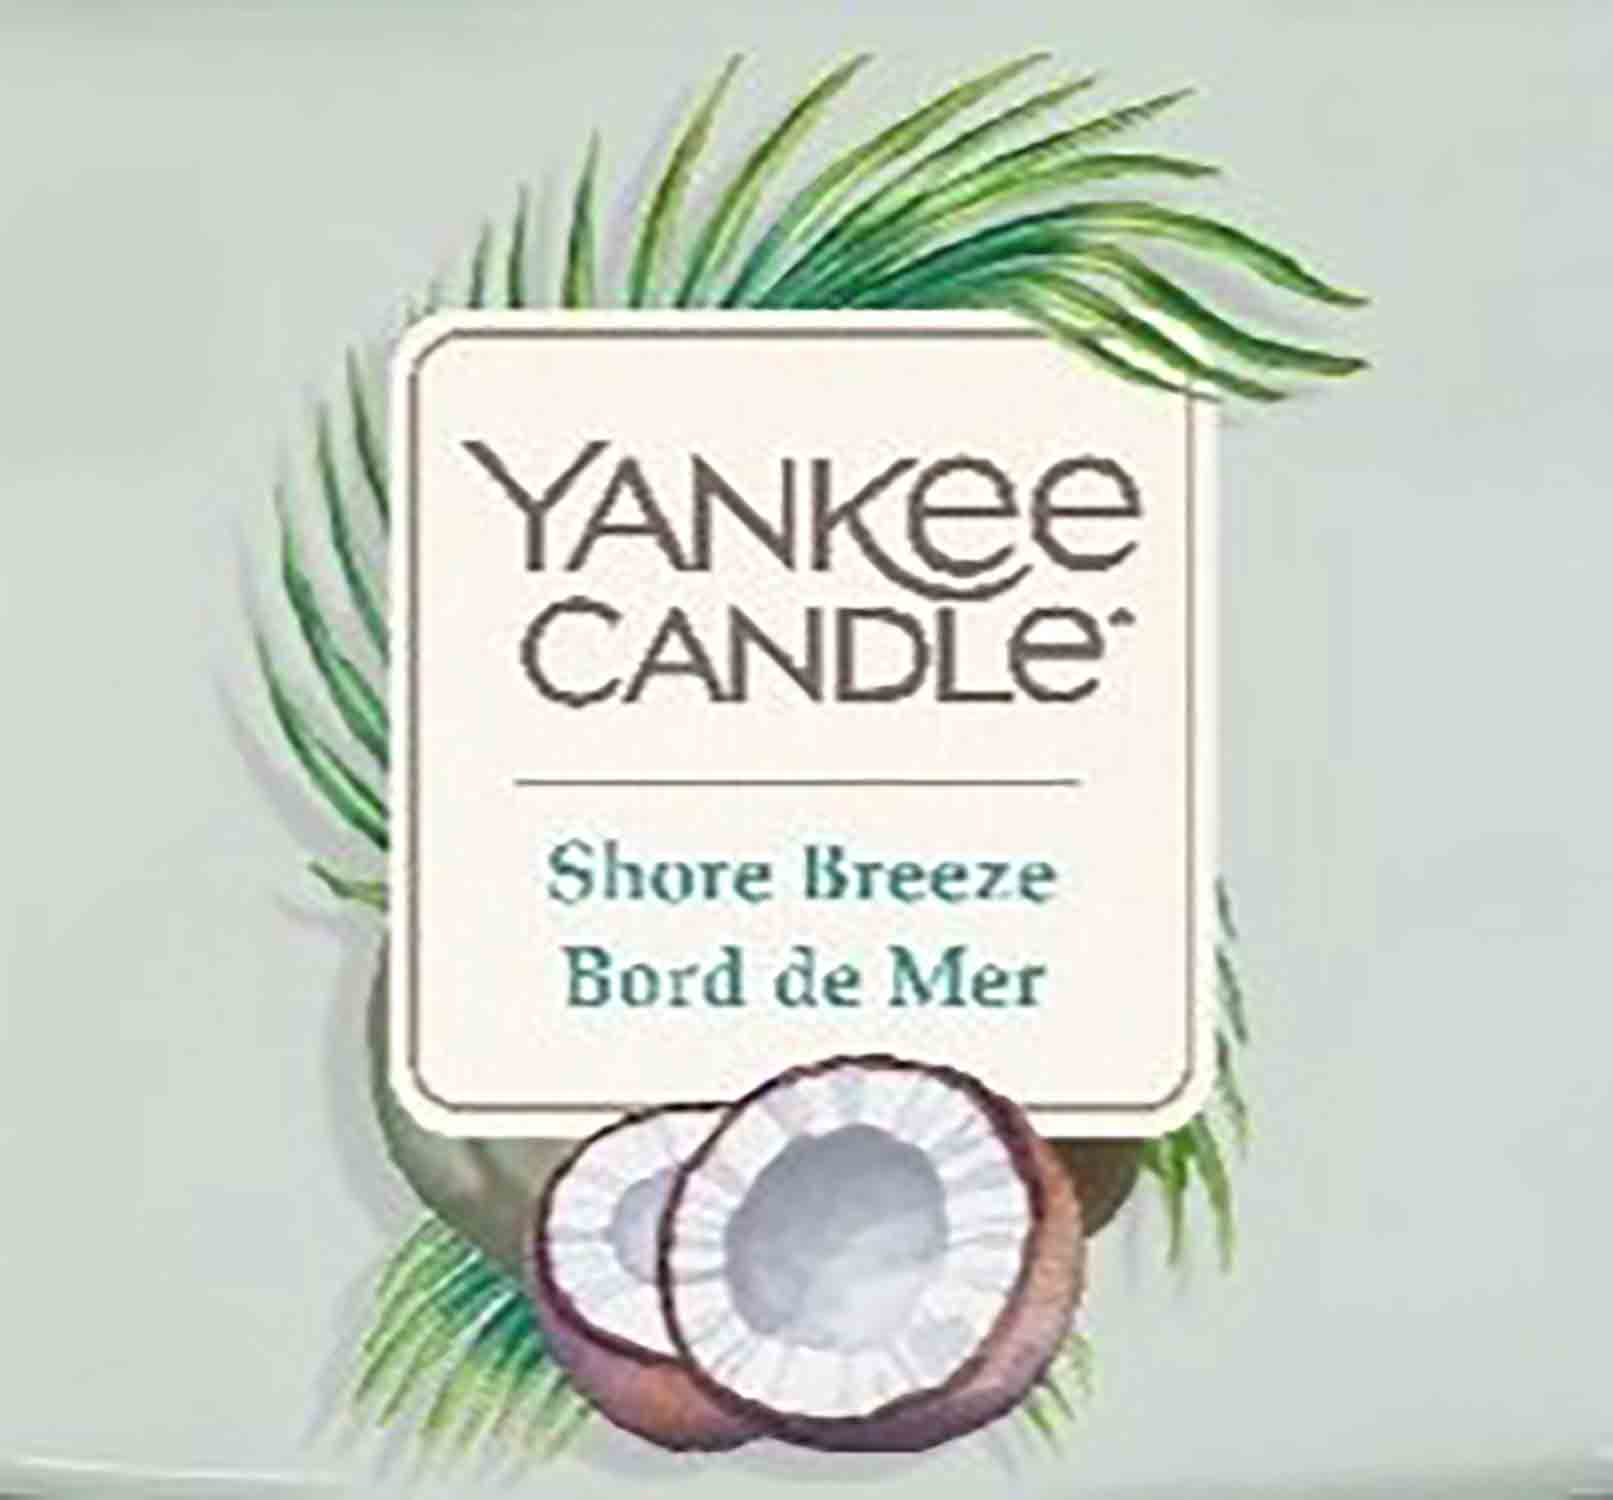 Yankee Candle Shore Breeze Elevation USA 22 g - Crumble vosk